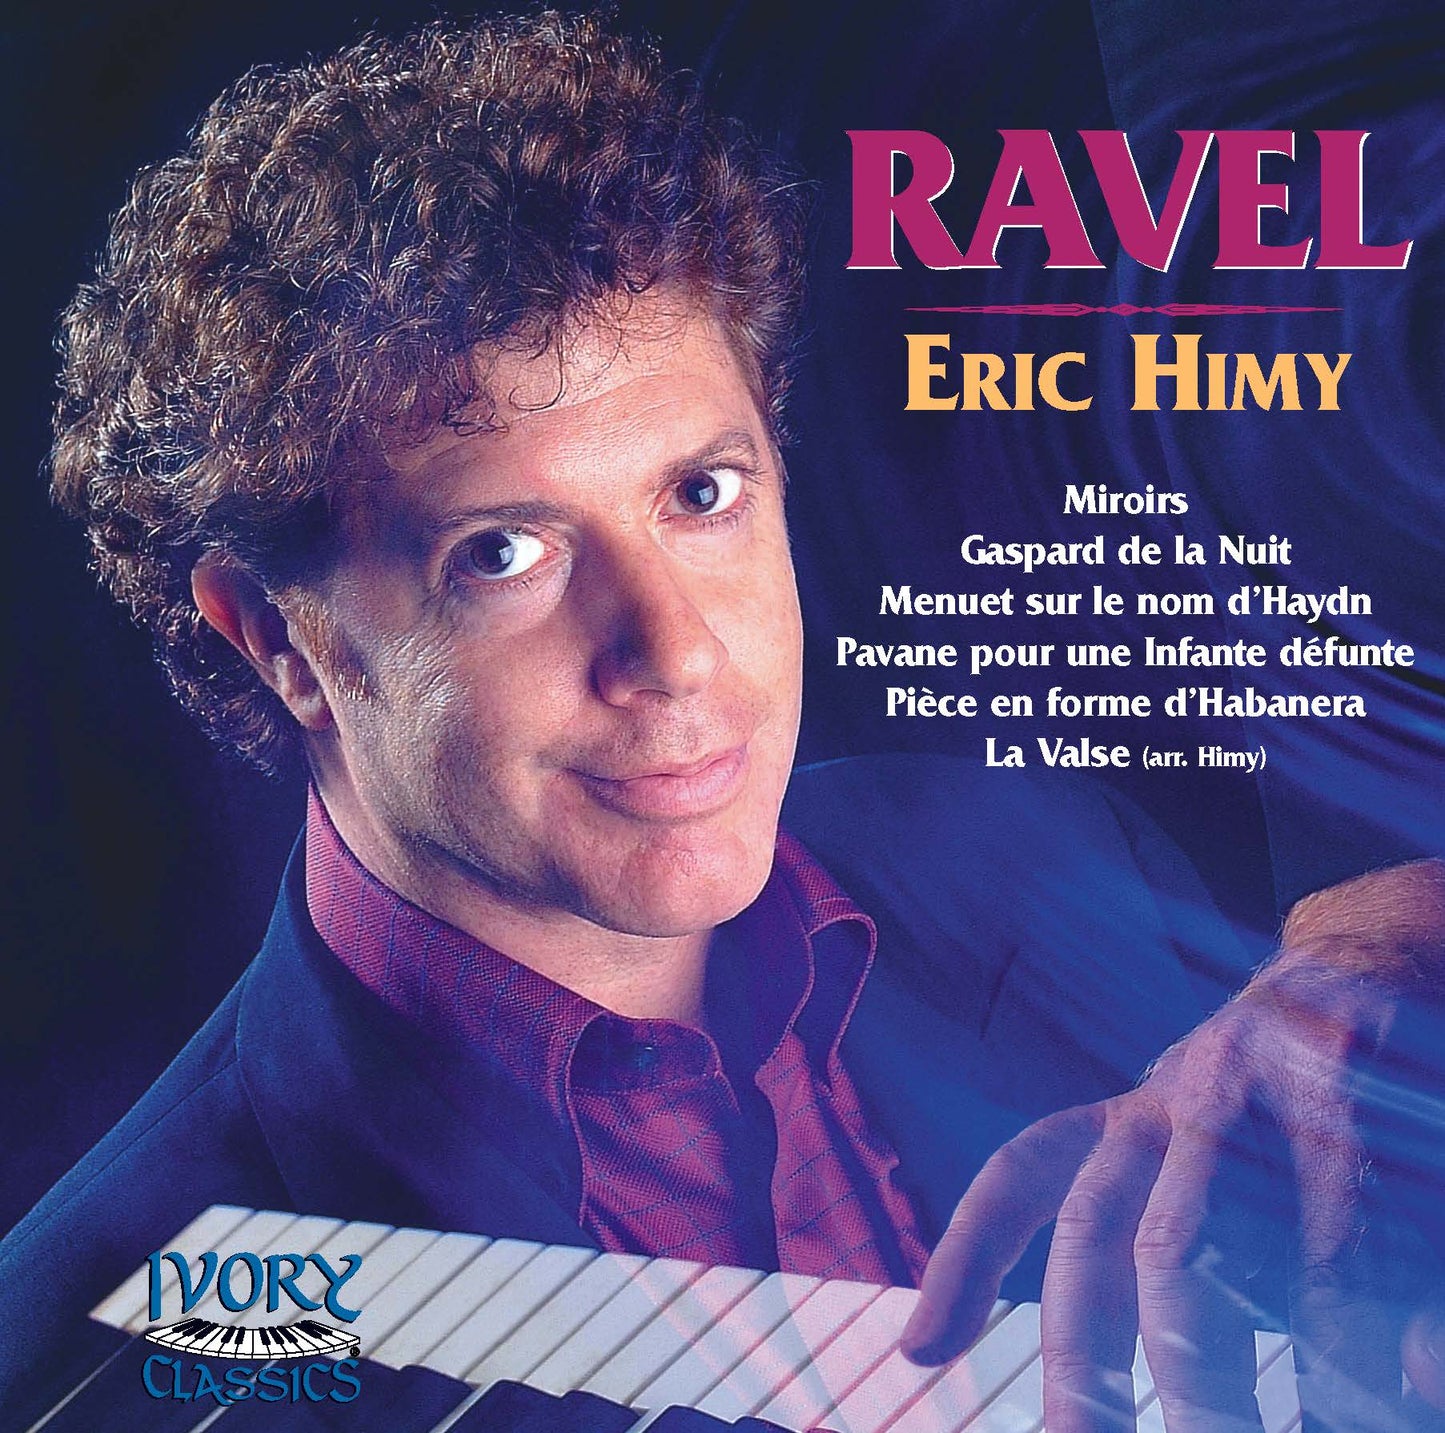 Eric Himy: Plays Ravel (CDr available only)